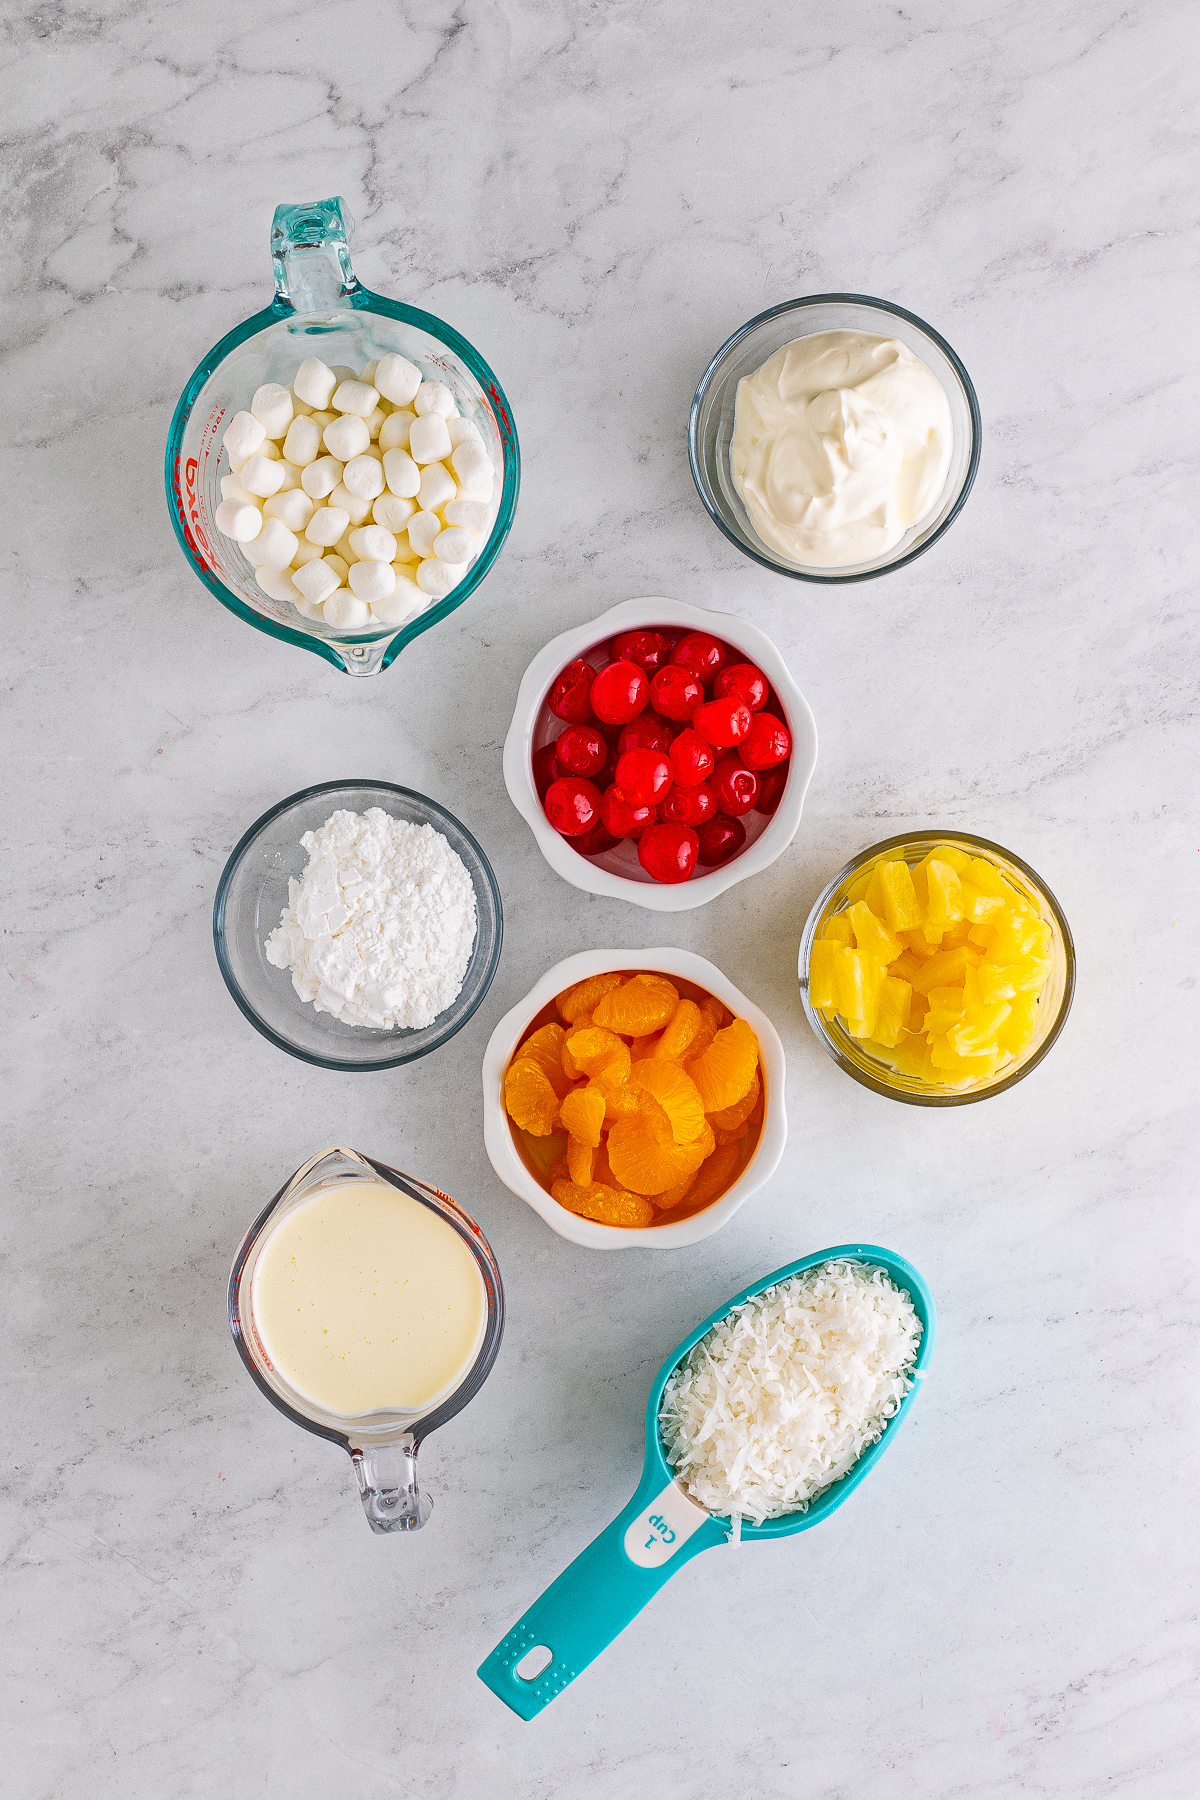 Ingredients needed to make an Ambrosia Salad Recipe.